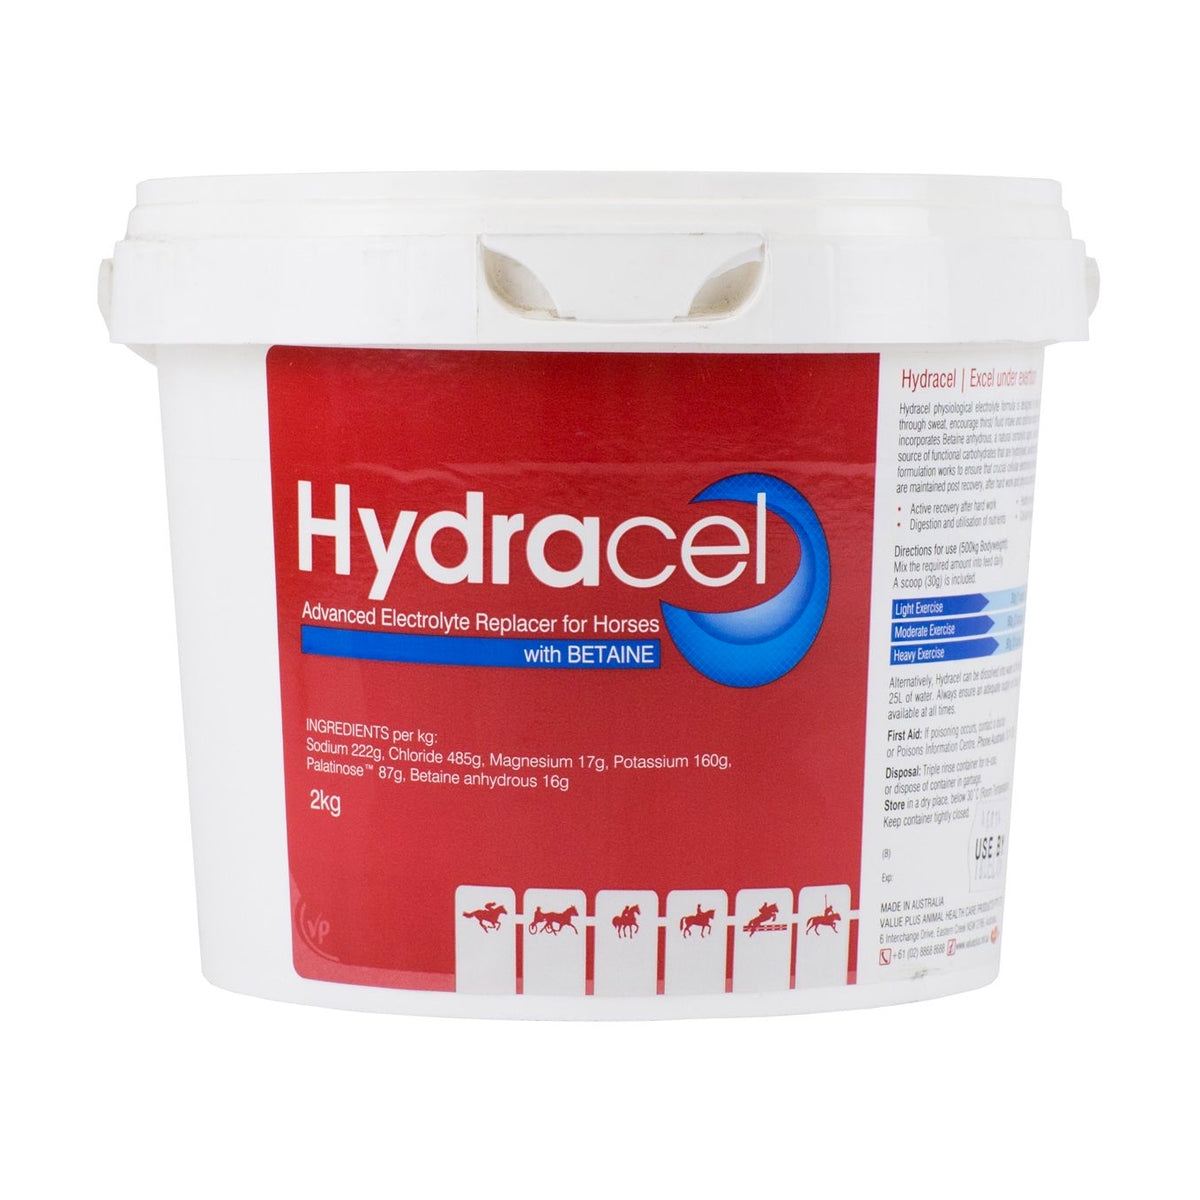 Hydracel Advanced Electrolyte Replacer for Horses 2kg